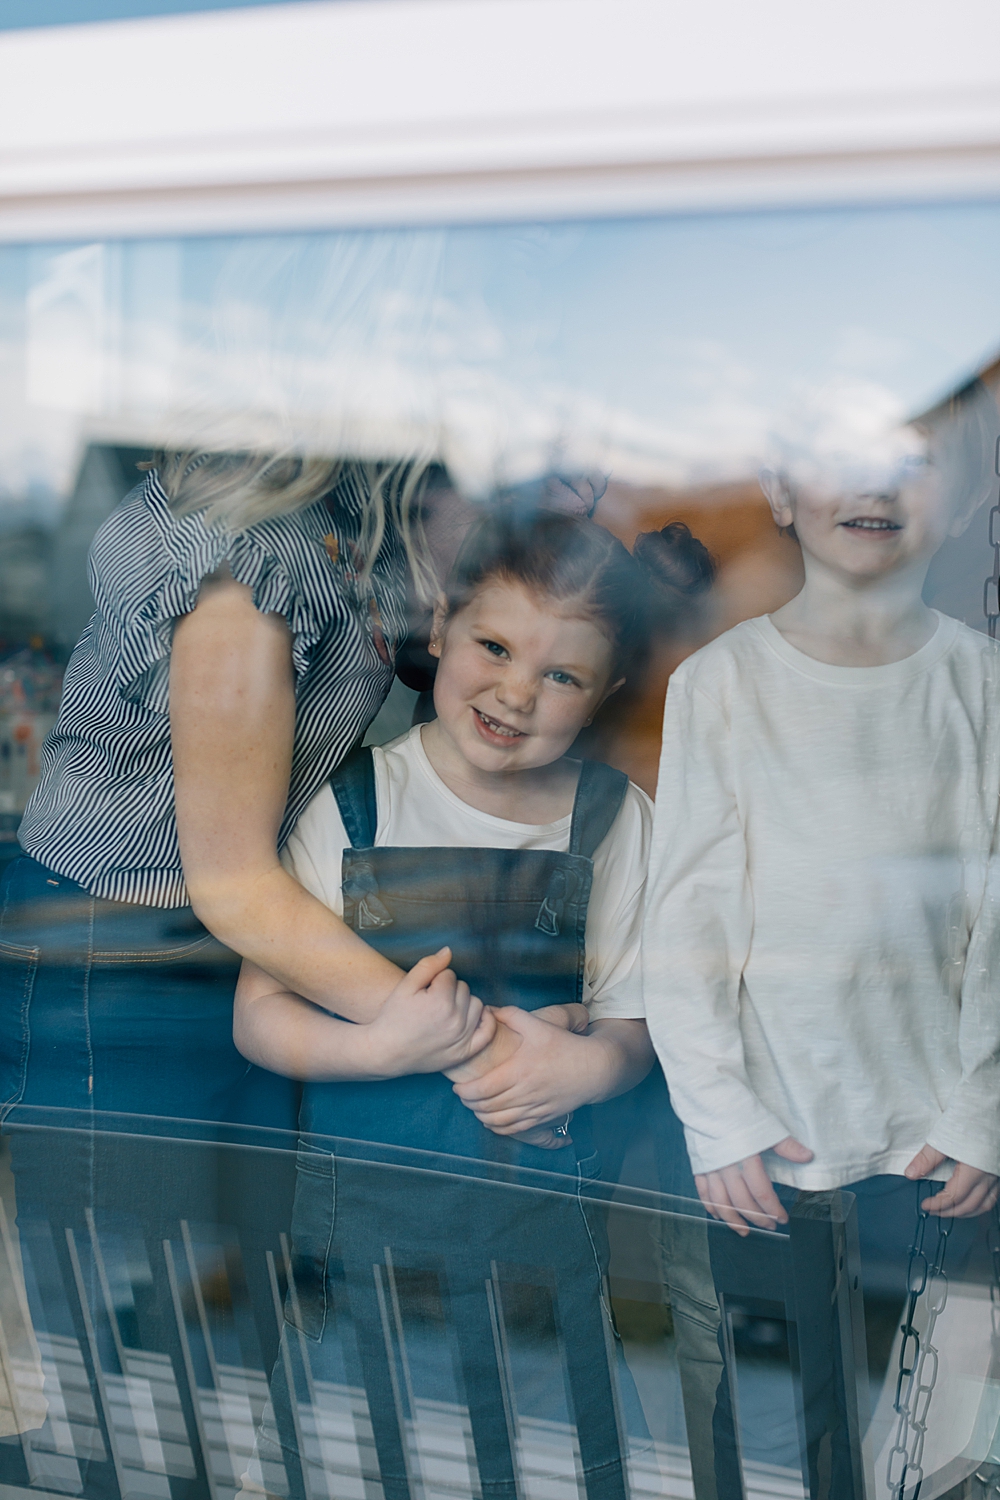 Truly Front Porch Series | The Walker Family | Herriman Photographer